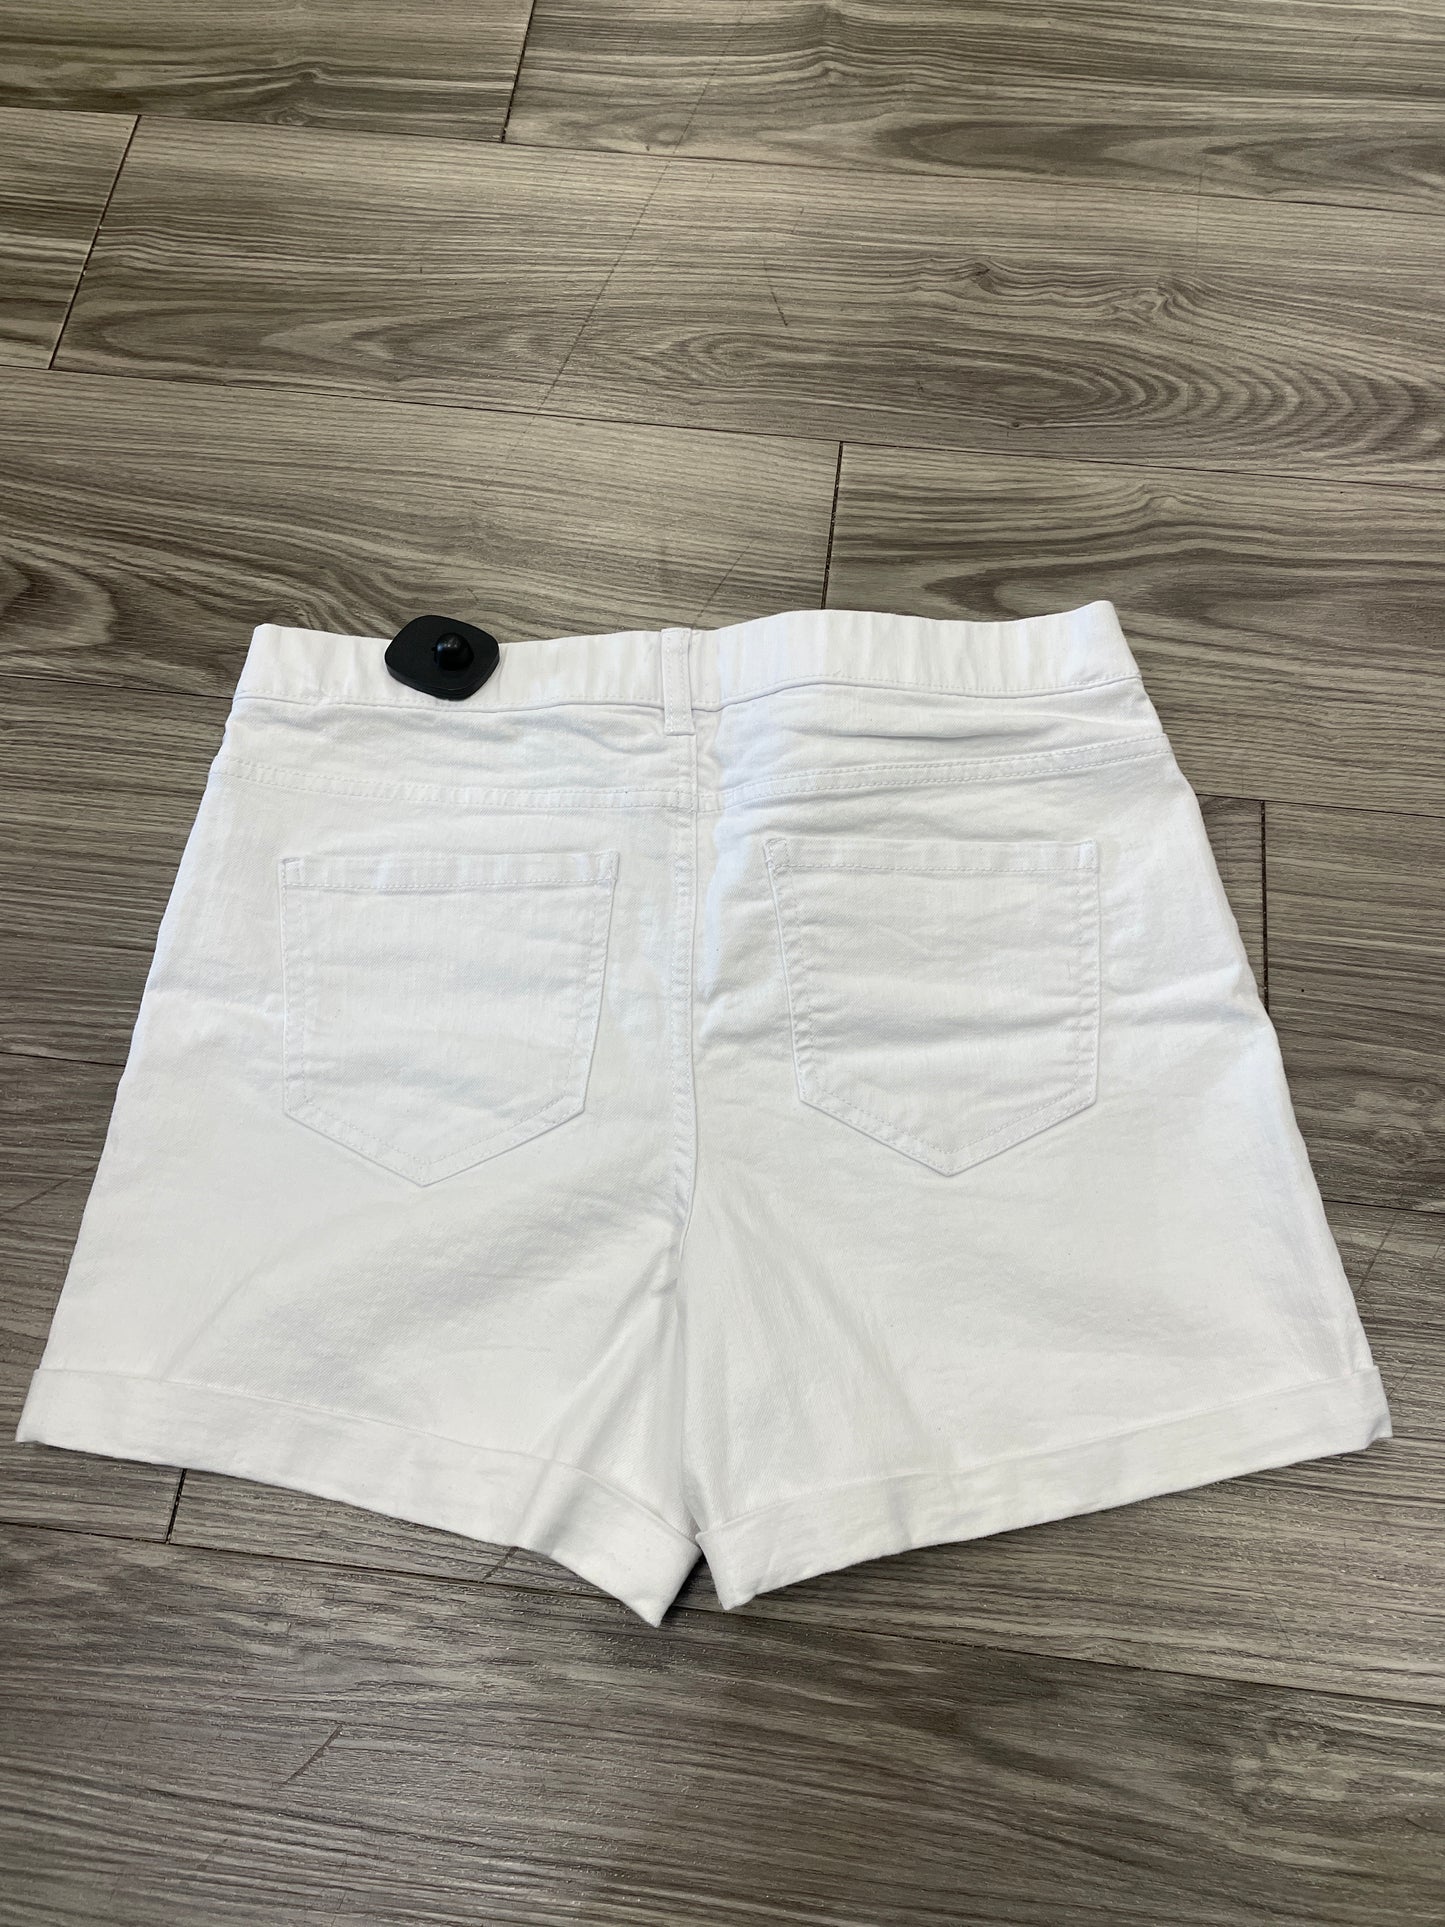 Shorts By Time And Tru  Size: M